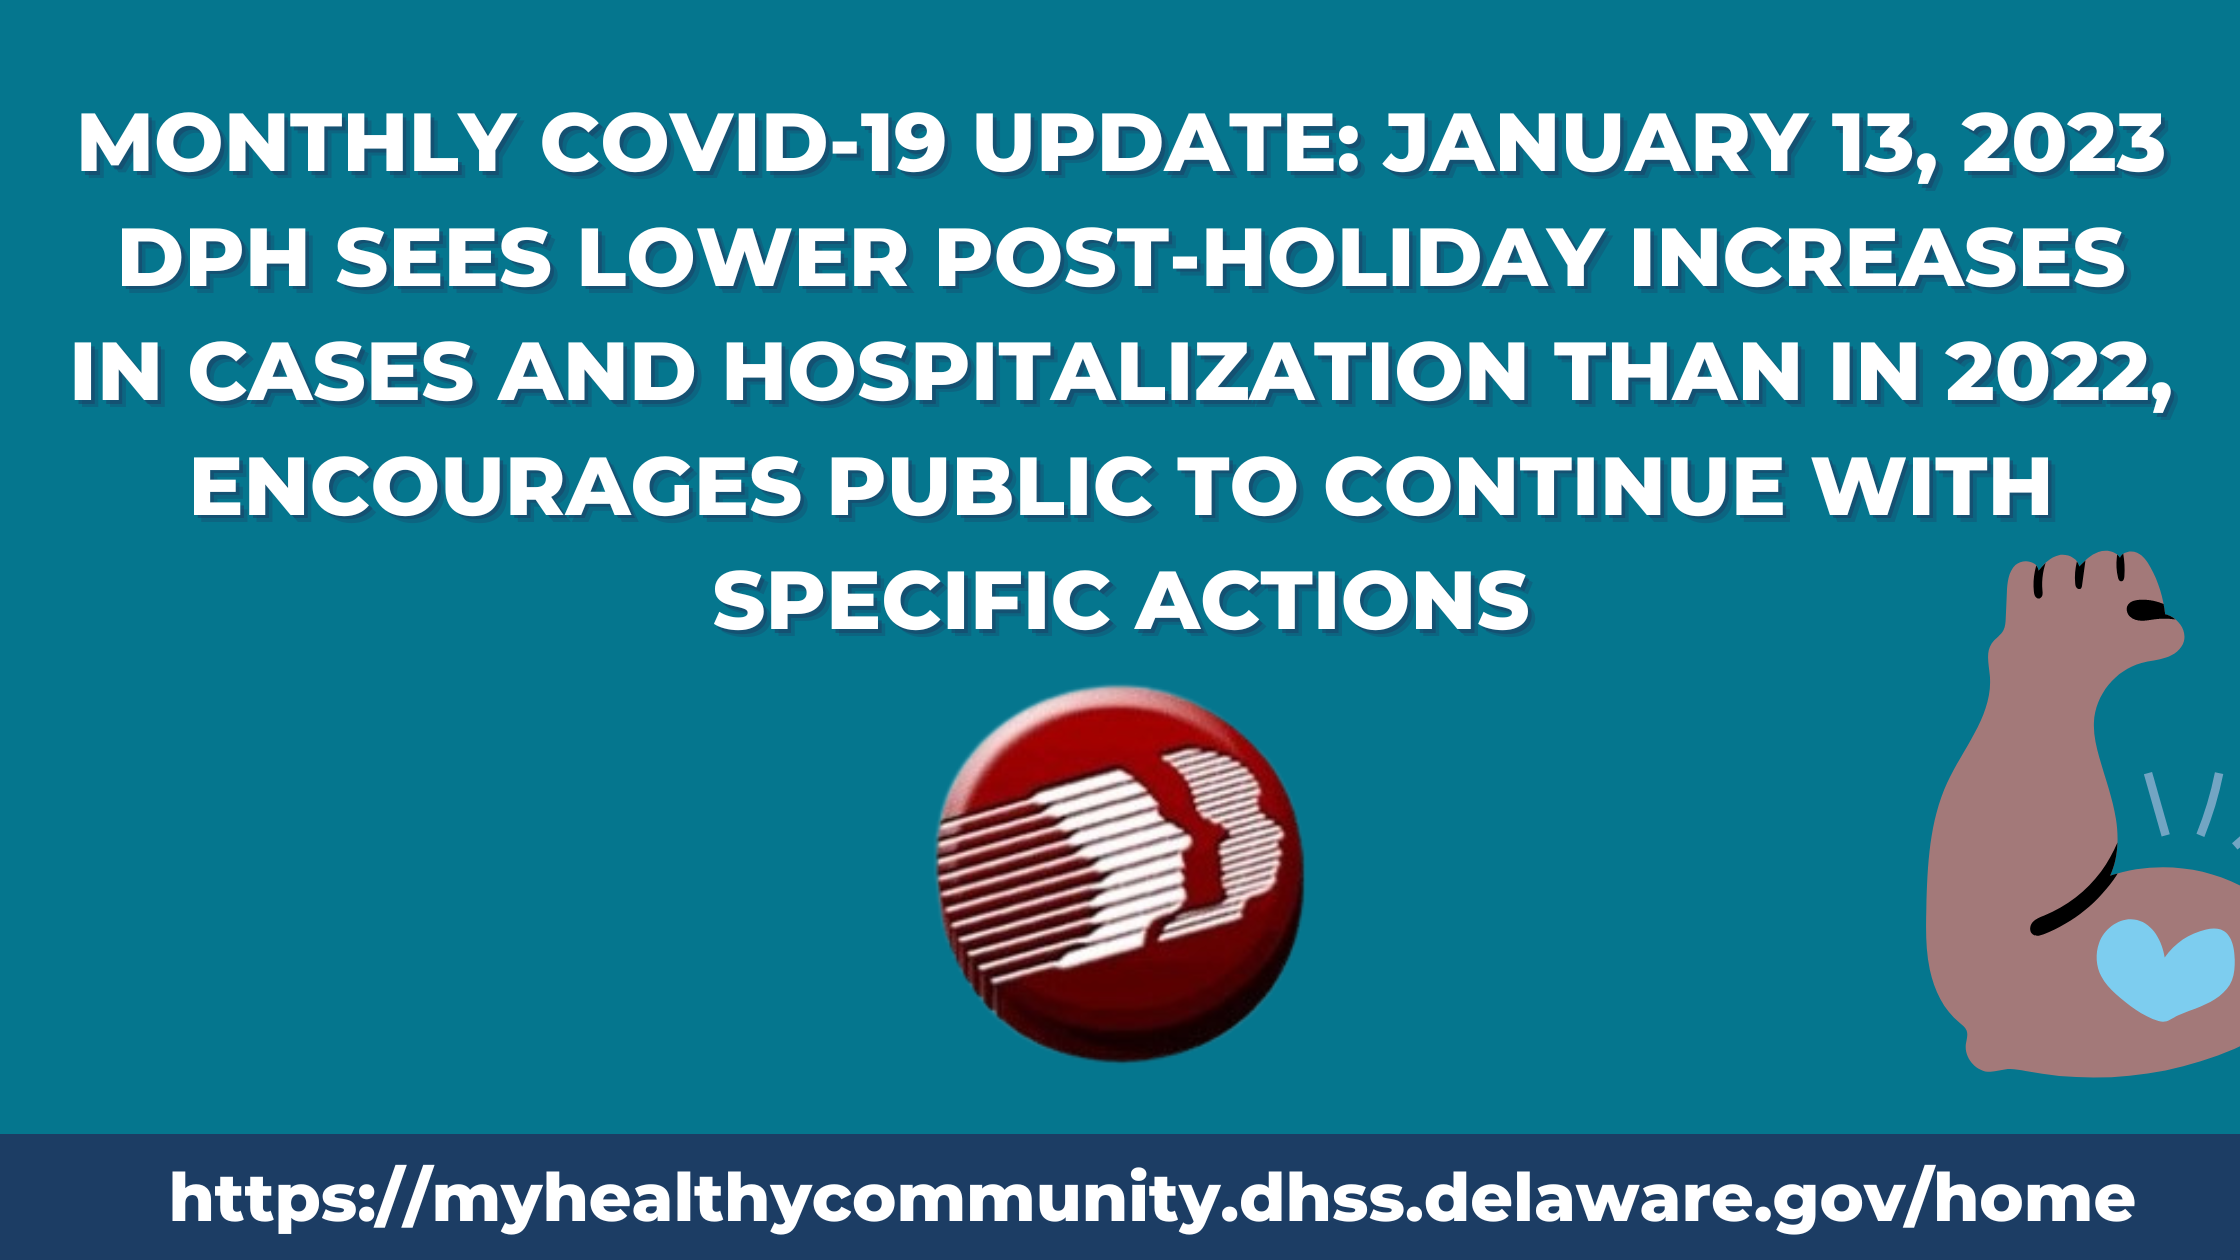 Monthly COVID-19 Update: January 13, 2023 DPH Sees Lower Post-Holiday Increases in Cases and Hospitalization than in 2022, Encourages Public to Continue With Specific Actions